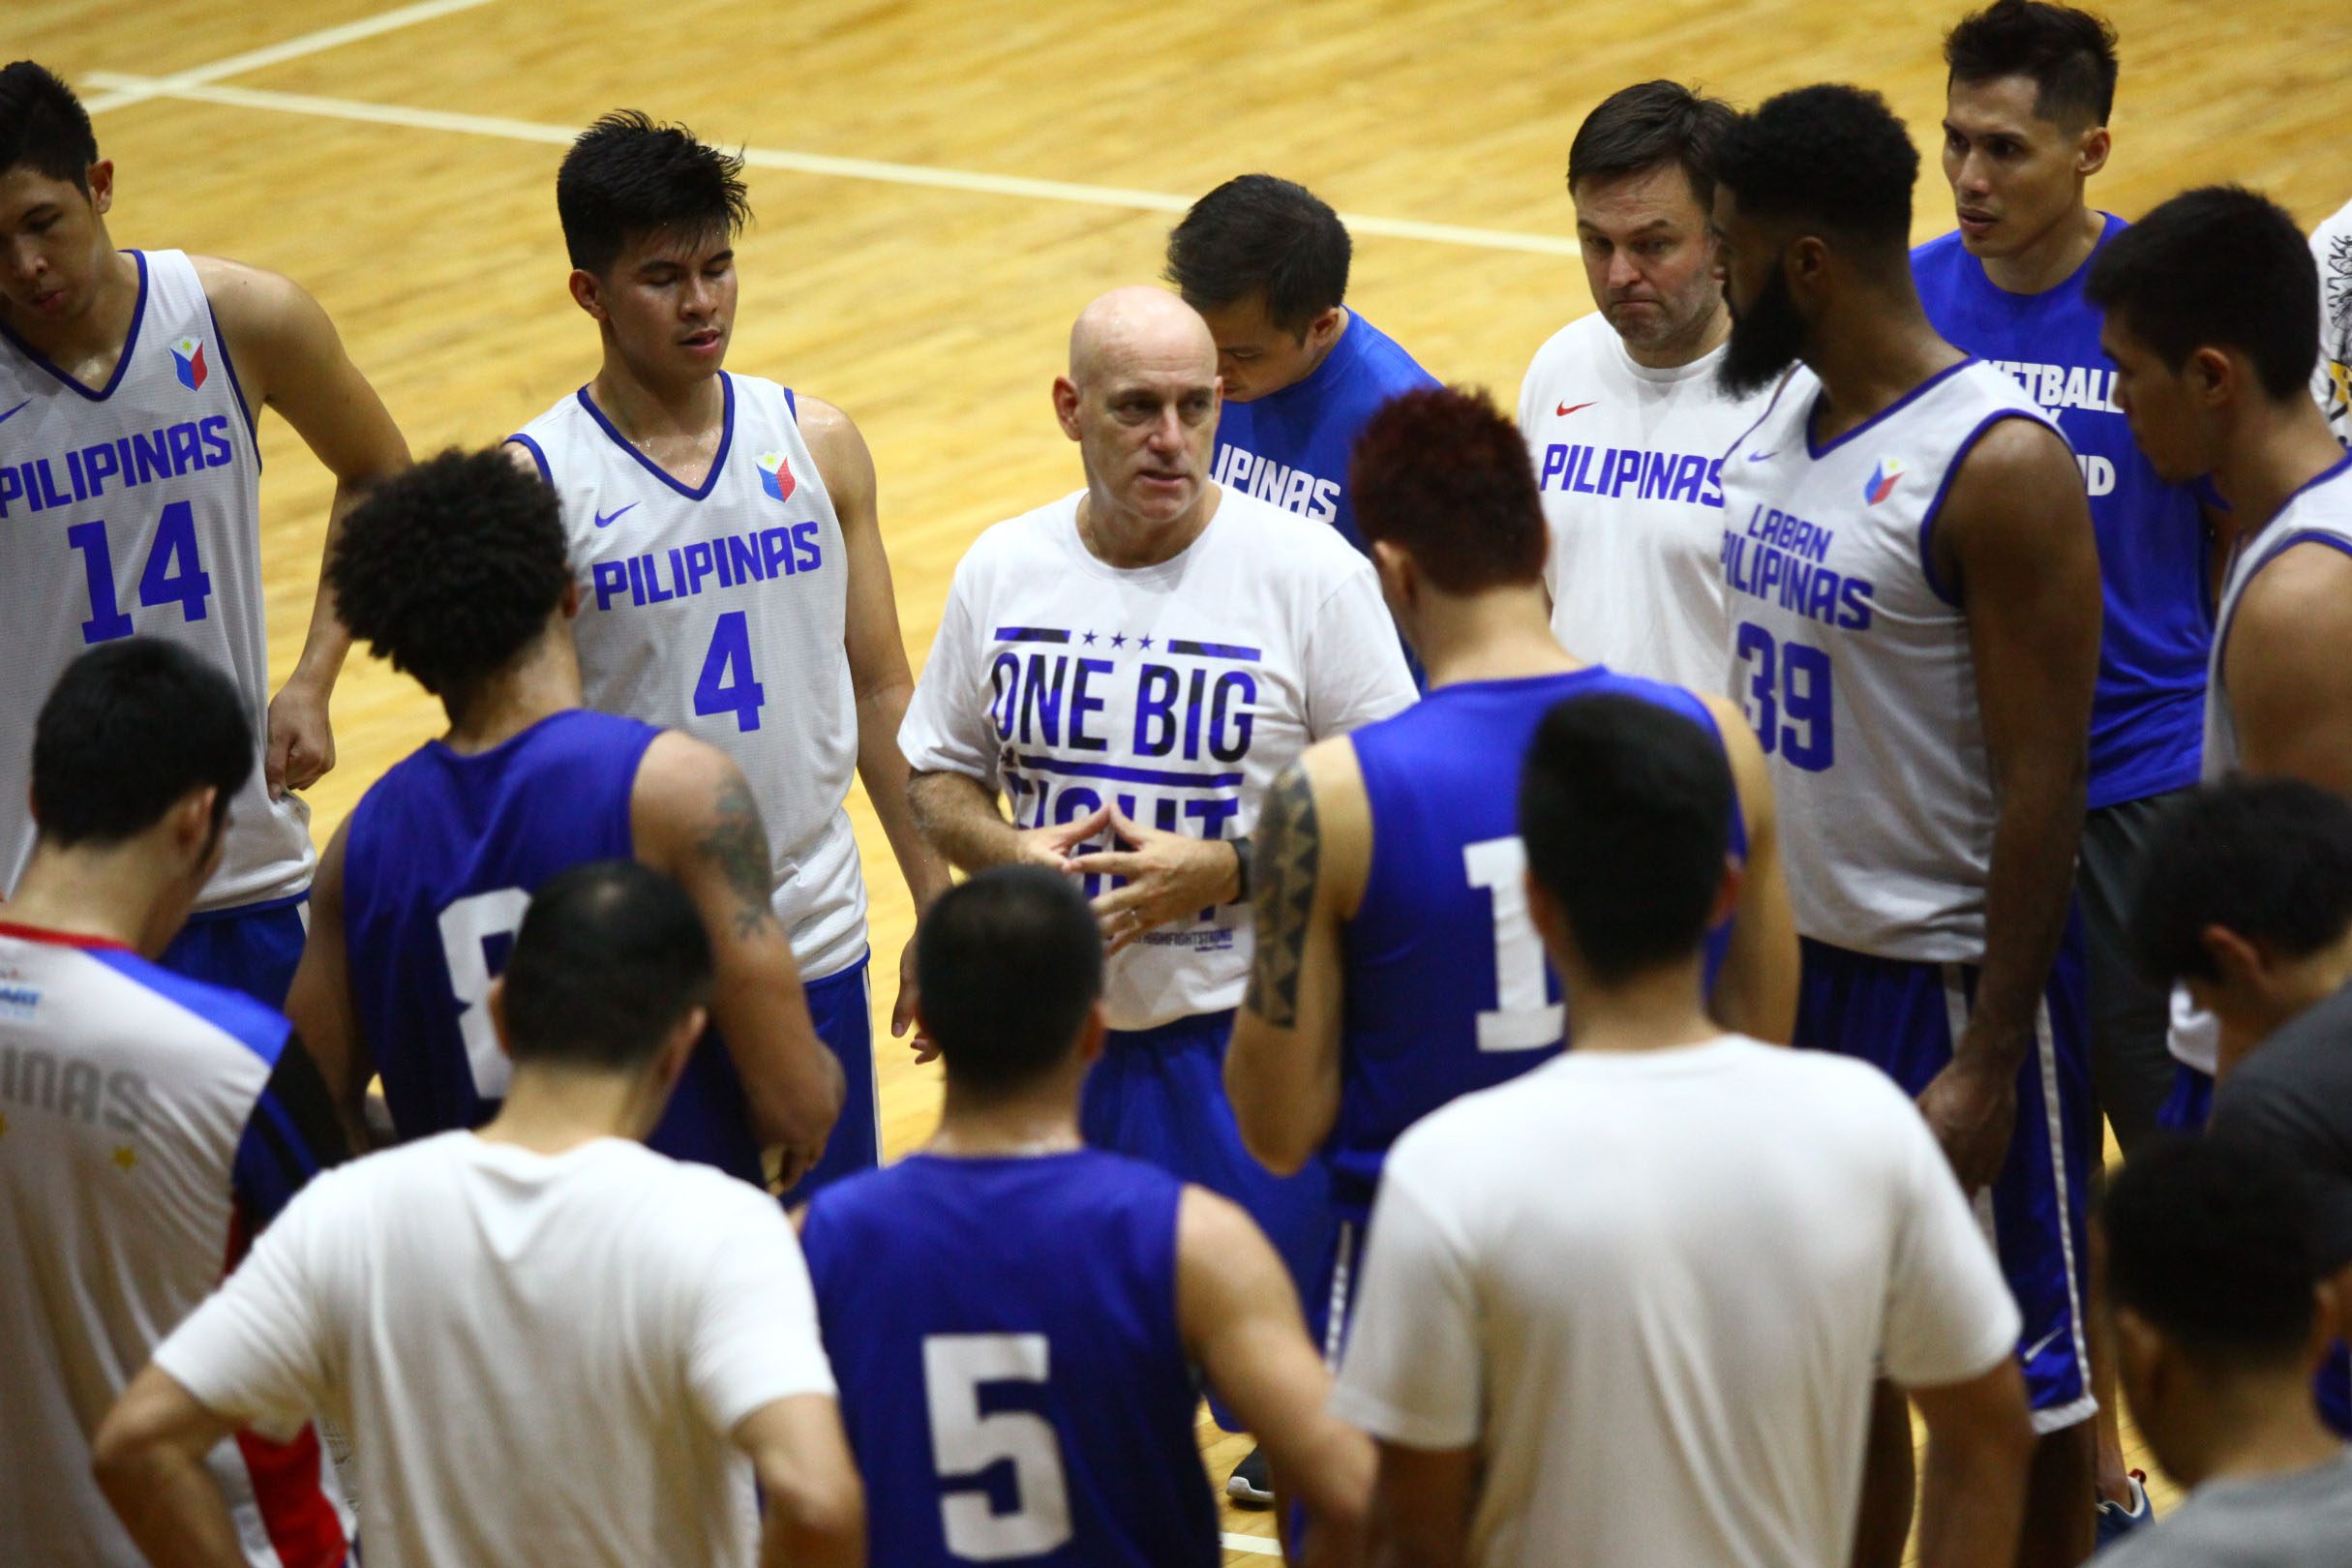 Gilas practice moved to Meralco after Ateneo bomb threat